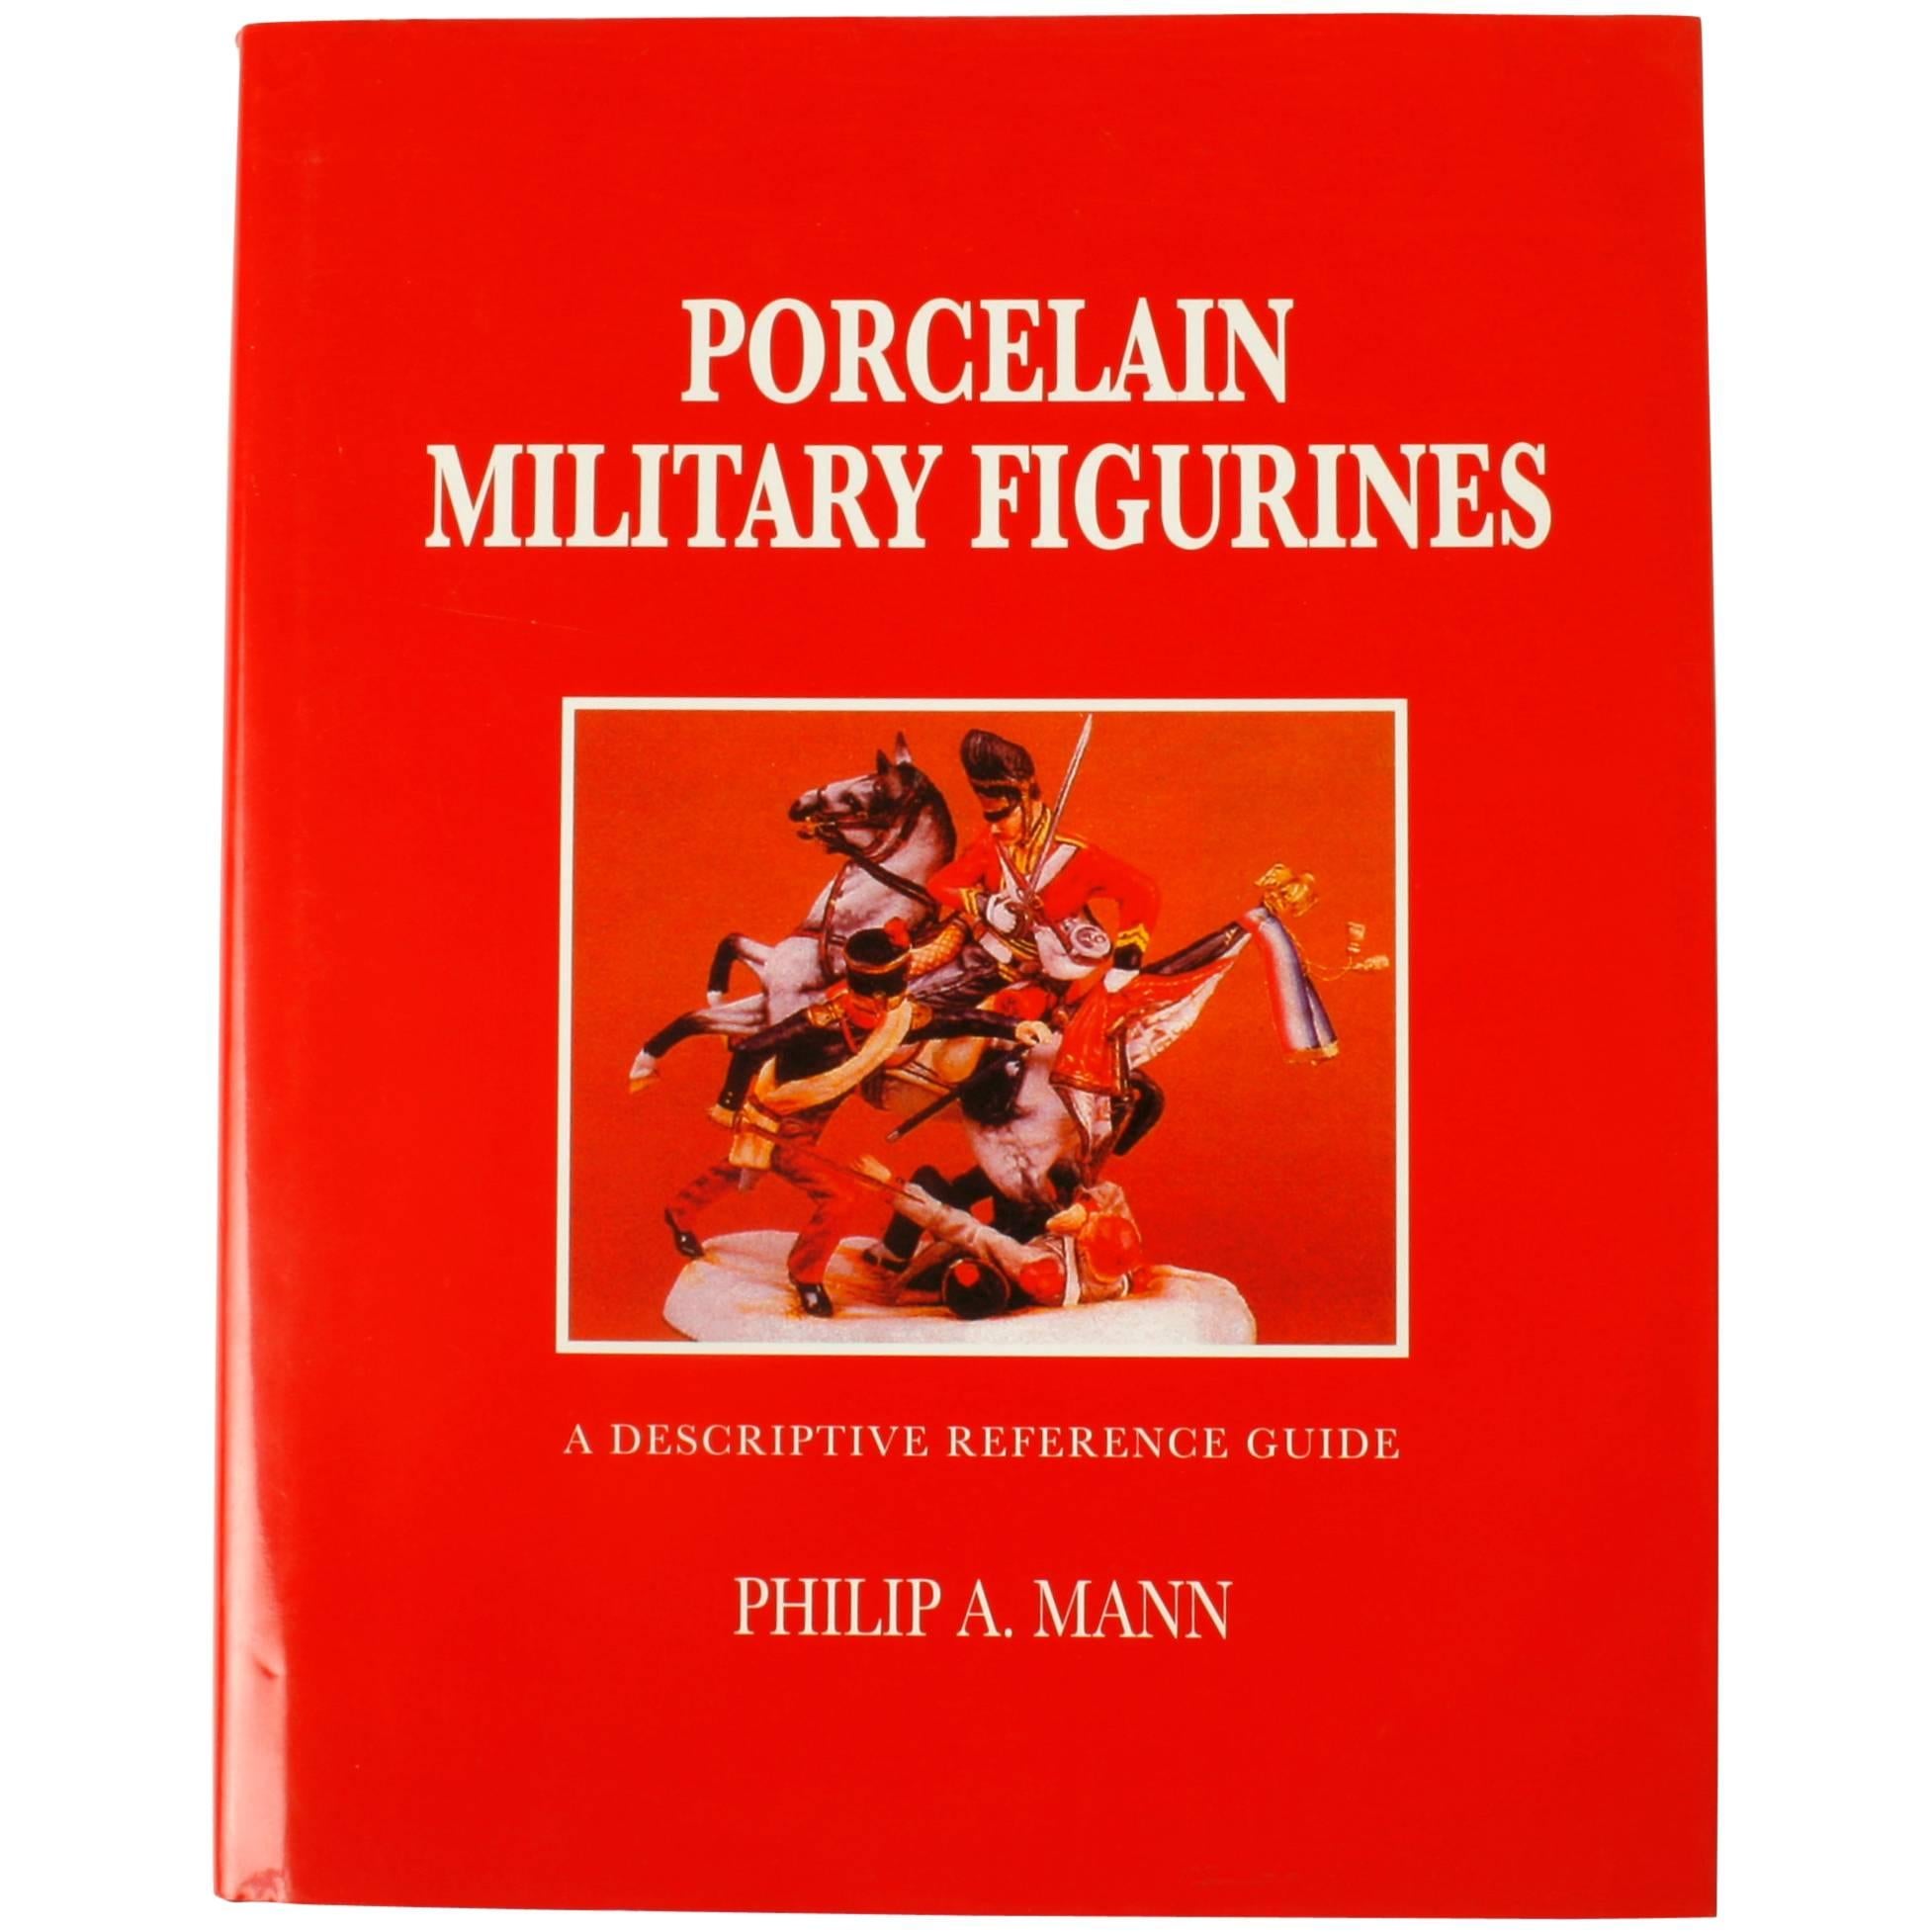 "Porcelain Military Figurines" Book by Philip A. Mann, Signed First Edition